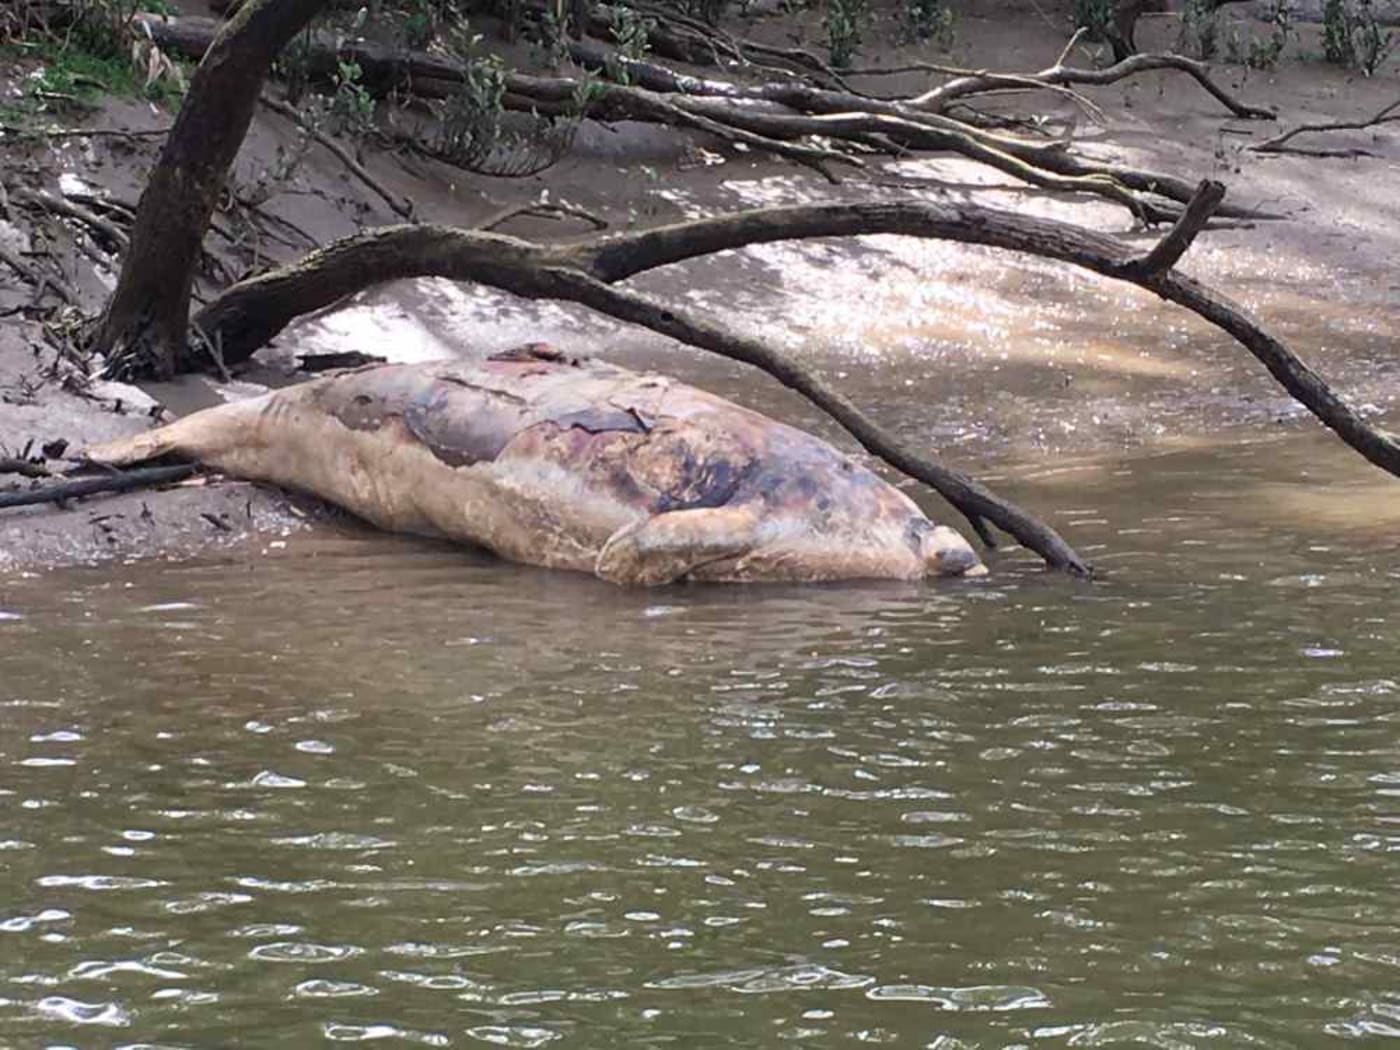 Dead dugong on bank in the upper Mary River